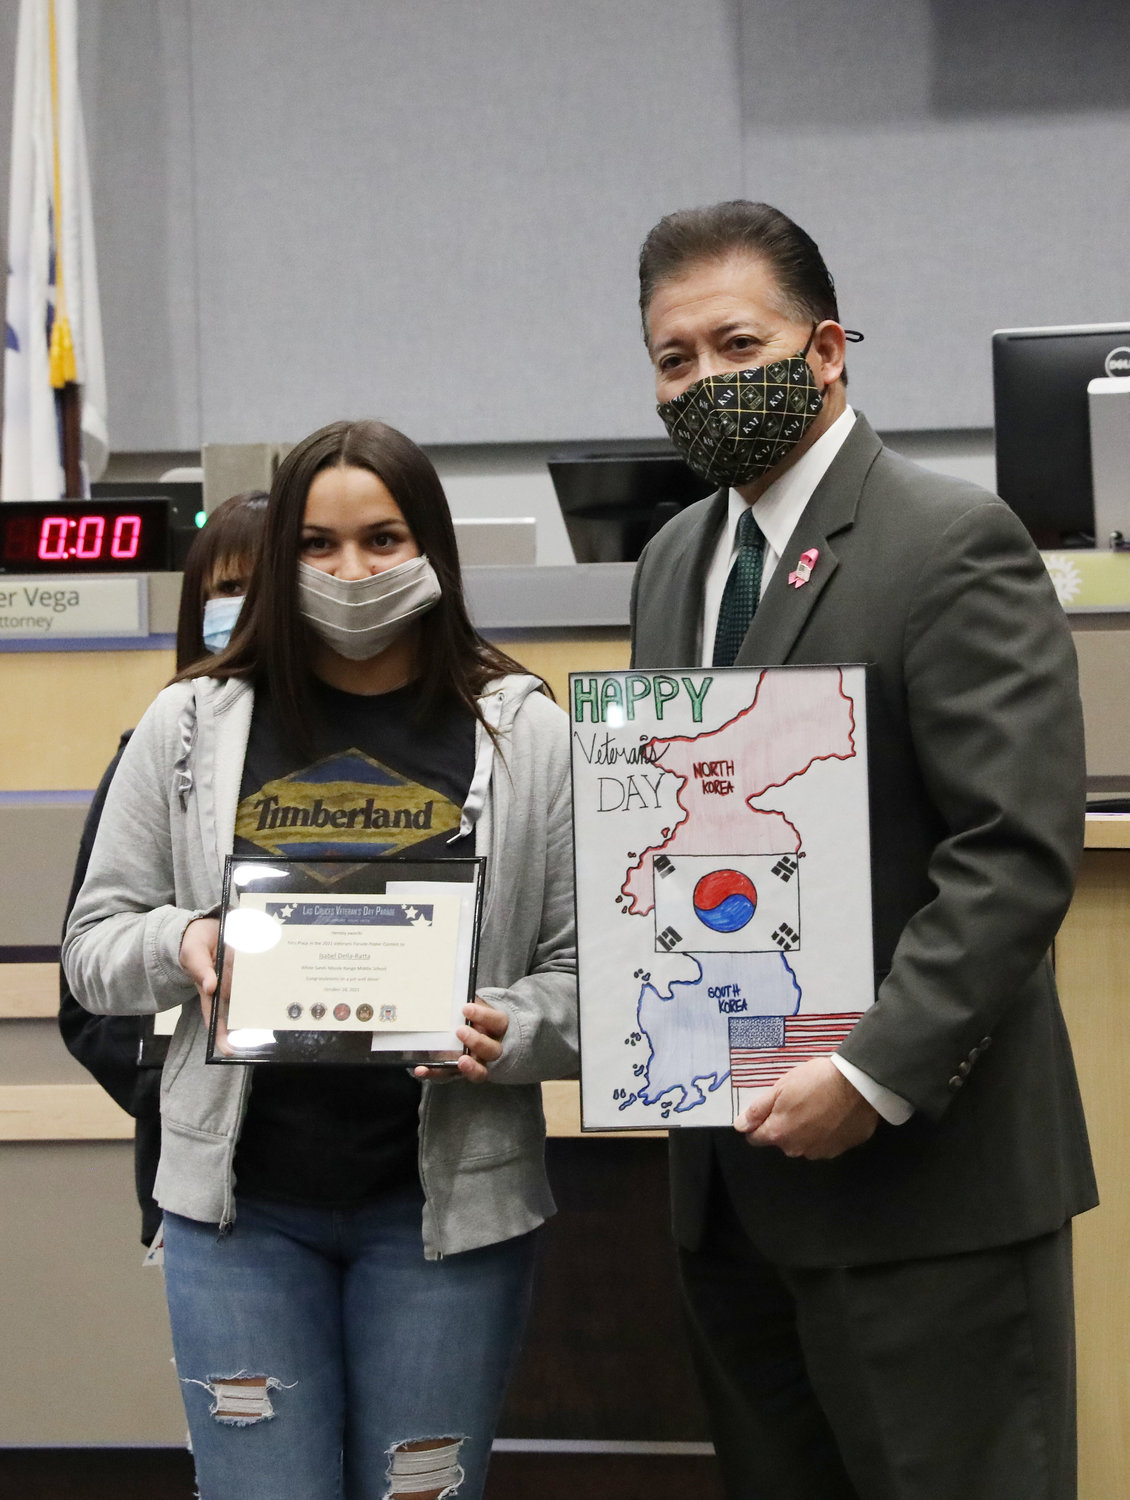 Isabel Della-Ratta, an eighth grader at White Sands Middle School, was the winner of the City of Las Cruces 2021 Veterans Parade Poster Contest. She is shown here with her winning entry with Mayor Ken Miyagishima at the Las Cruces City Council’s Oct. 18 regular meeting. Isabel won $40 for her first-place poster and will be featured in the Nov. 6 parade. The committee has held a parade poster contest for Las Cruces middle and high school students since 2015. There were 150 submissions this year, with six winners selected for first-, second- and third place, along with honorable mentions.